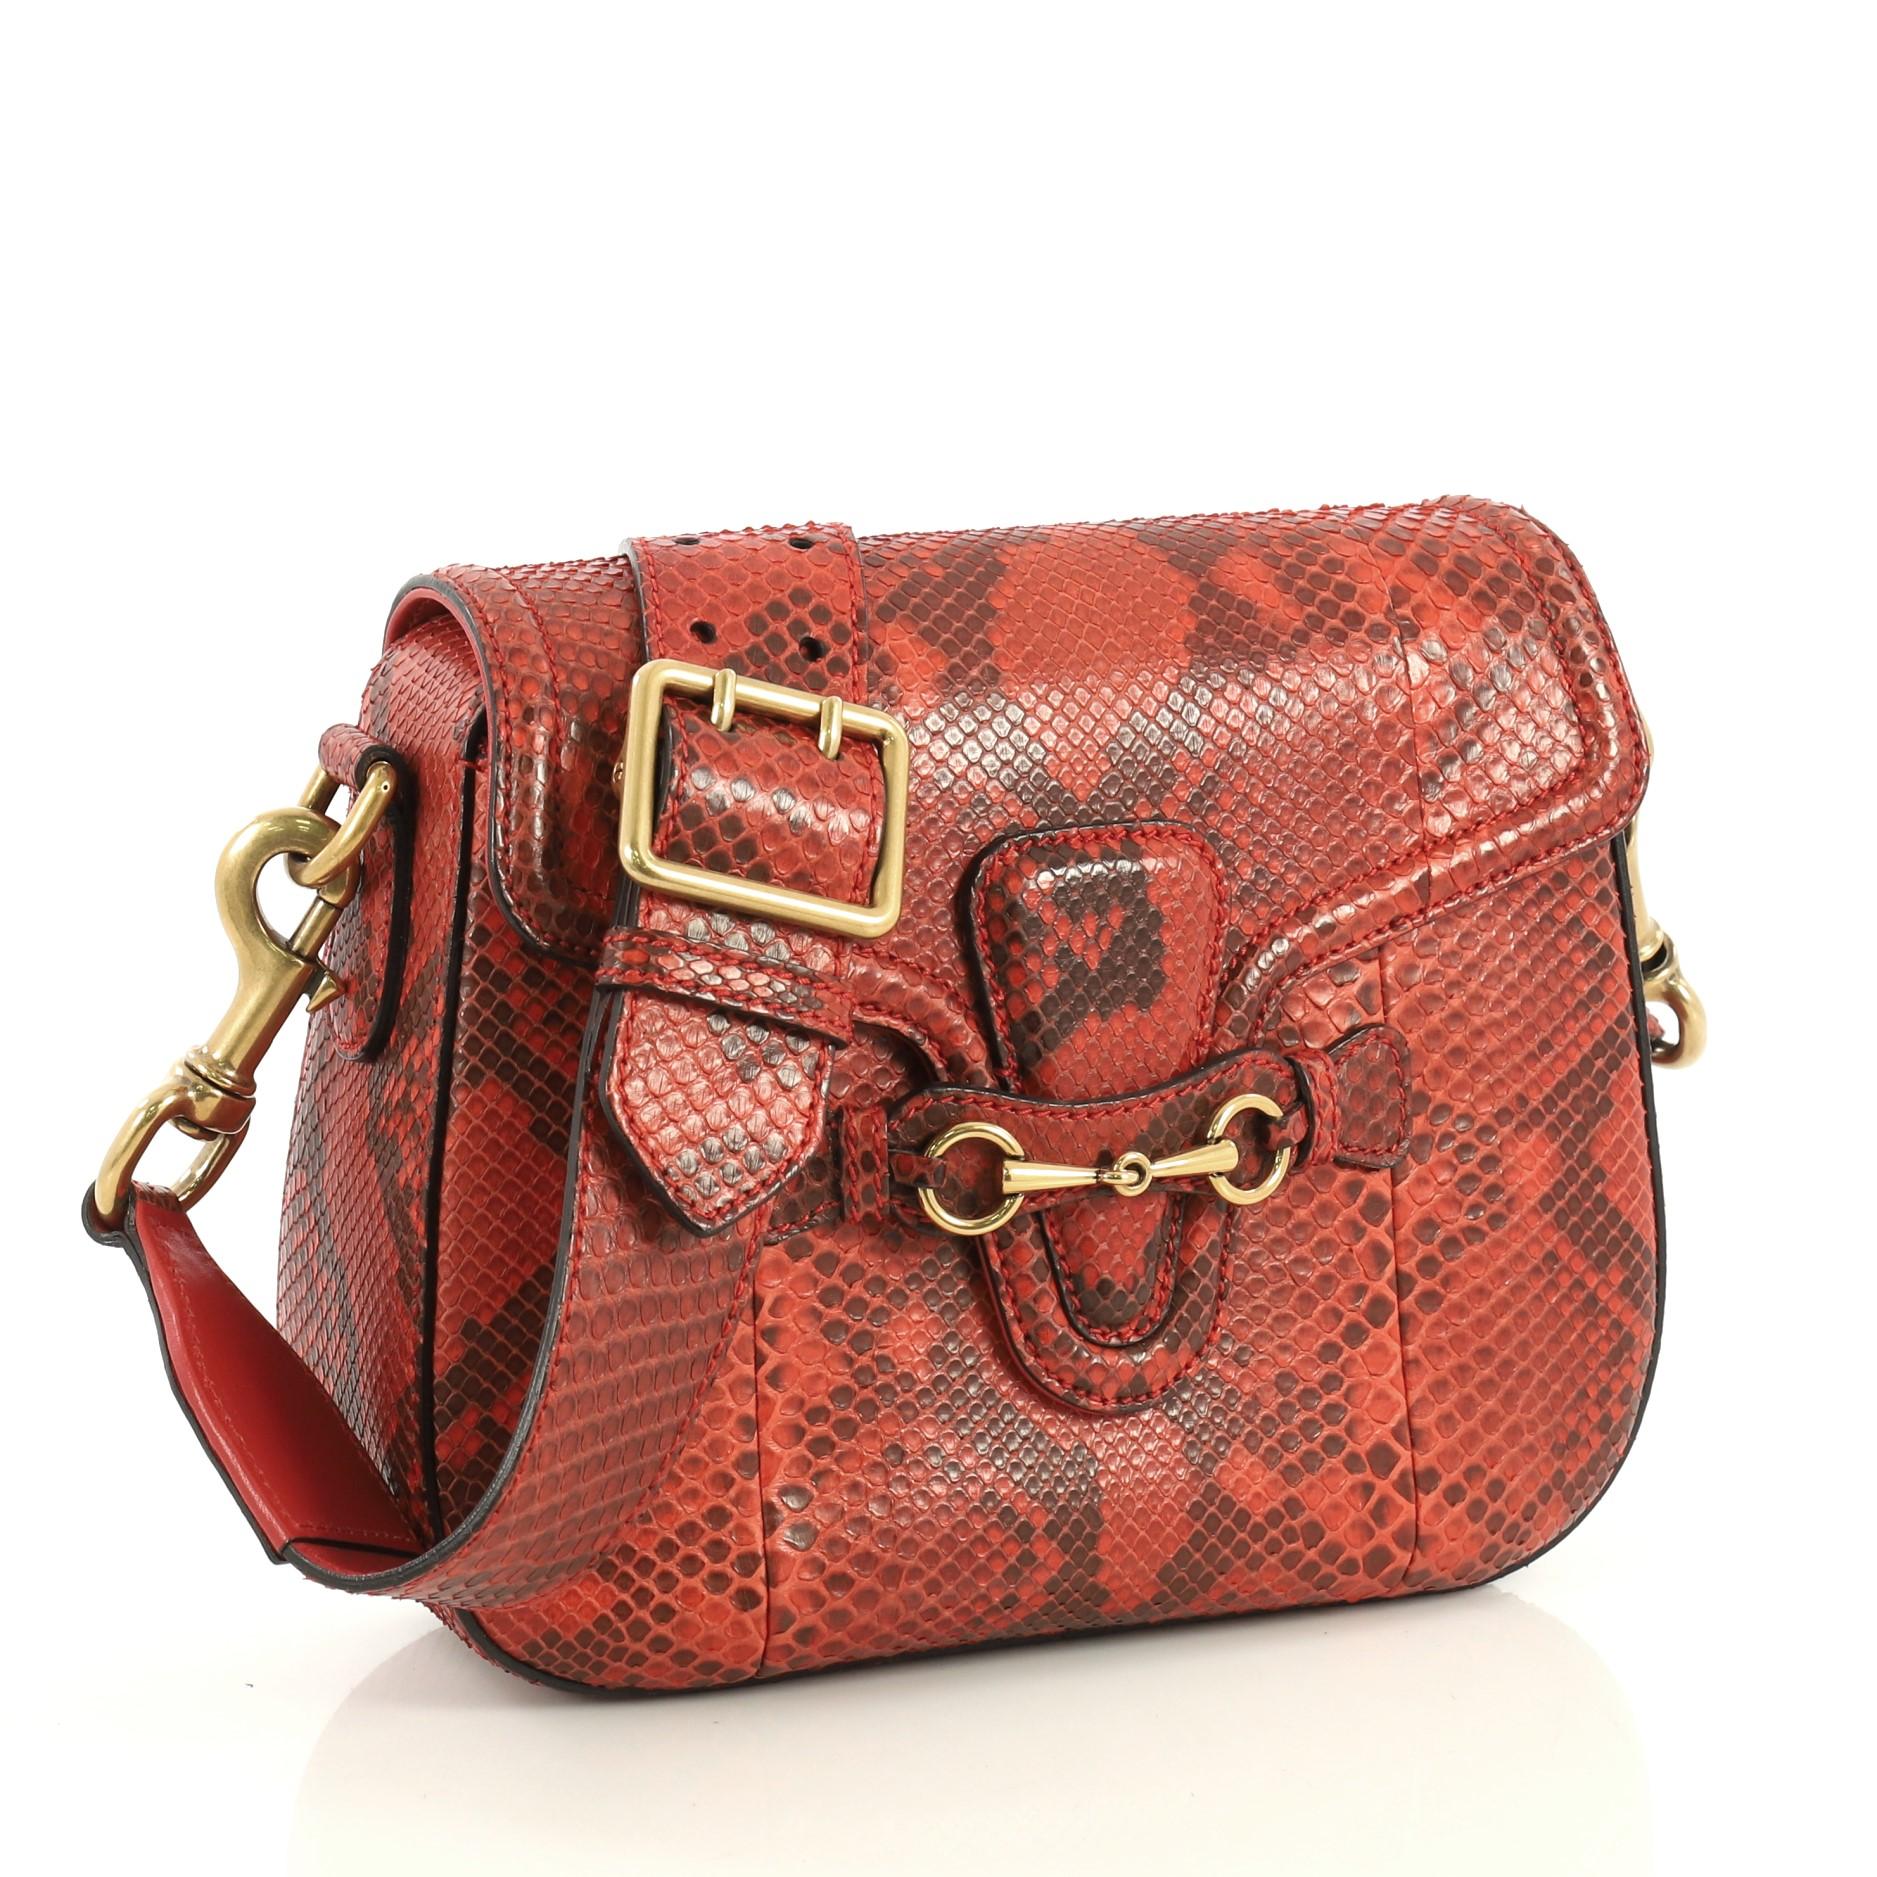 This Gucci Lady Web Shoulder Bag Python Medium, crafted from genuine orange python, features a detachable shoulder strap and aged gold-tone hardware. Its flap closure with horsebit buckle detail opens to an orange leather interior with side zip and